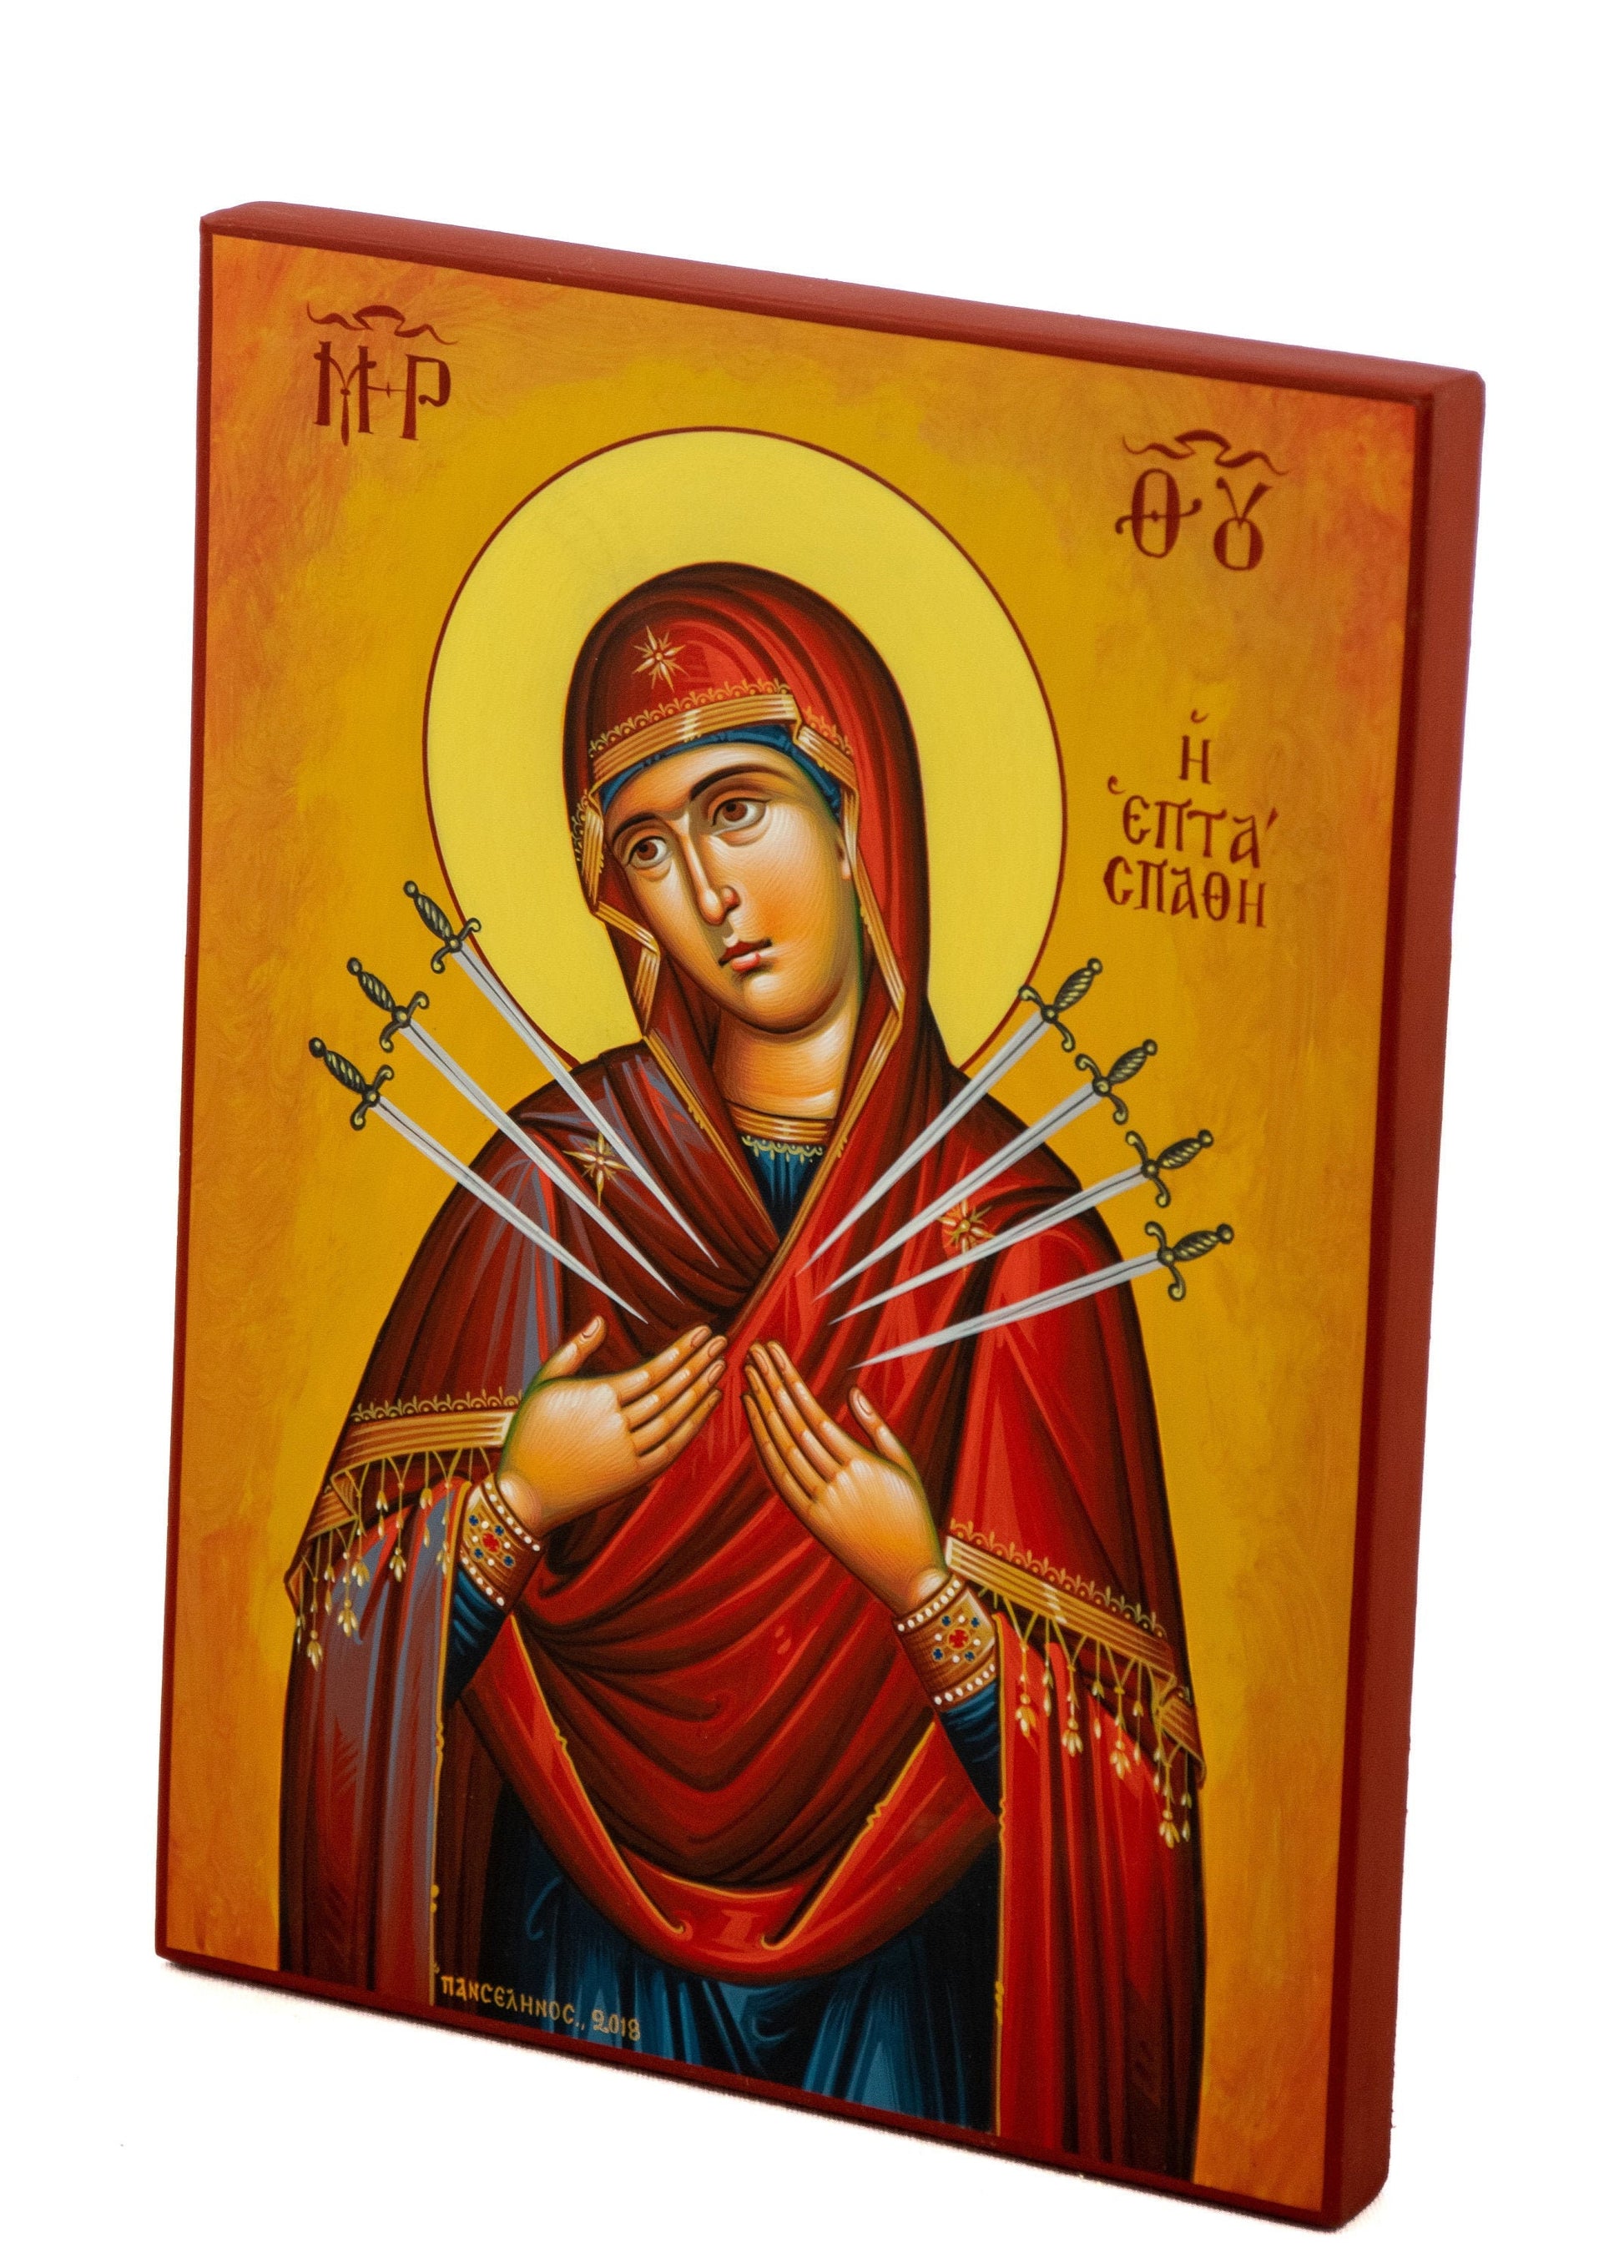 Hand painted Virgin Mary icon of the 7 Seven Swords, Greek Orthodox icon of Panagia Theotokos, Byzantine art wall hanging Mother of God TheHolyArt